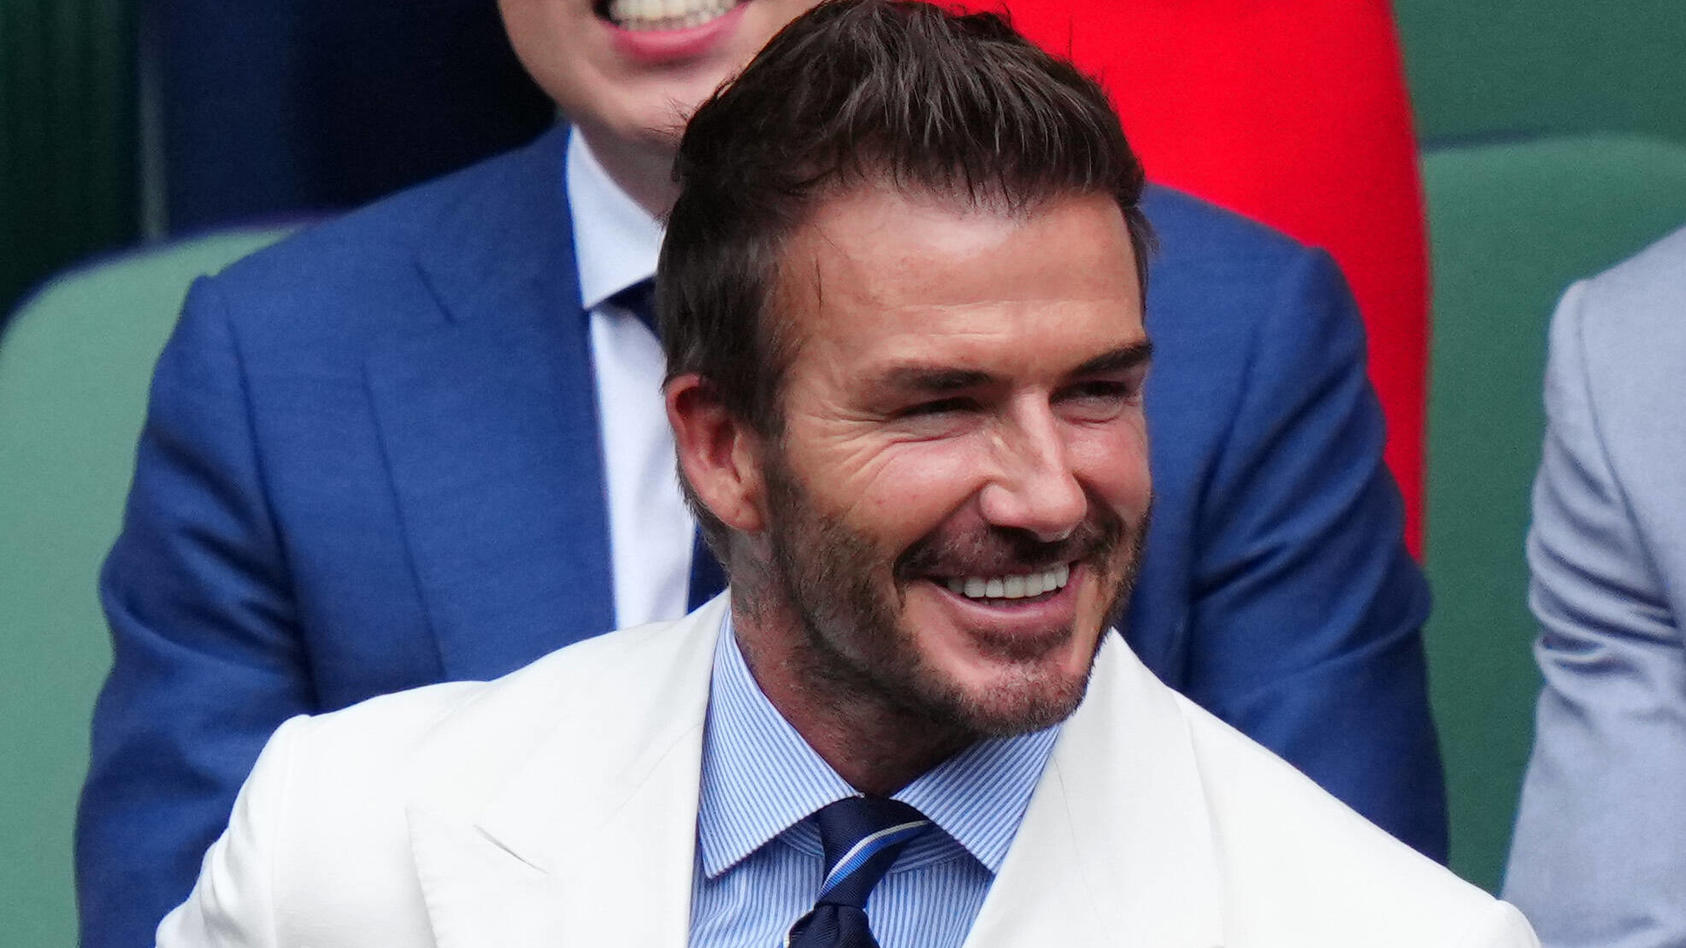  Mandatory Credit: Photo by Shutterstock 12202136l David Beckham in the Royal Box on Centre Court Wimbledon Tennis Championships, Day 11, The All England Lawn Tennis and Croquet Club, London, UK - 09 Jul 2021 Wimbledon Tennis Championships, Day 11, T